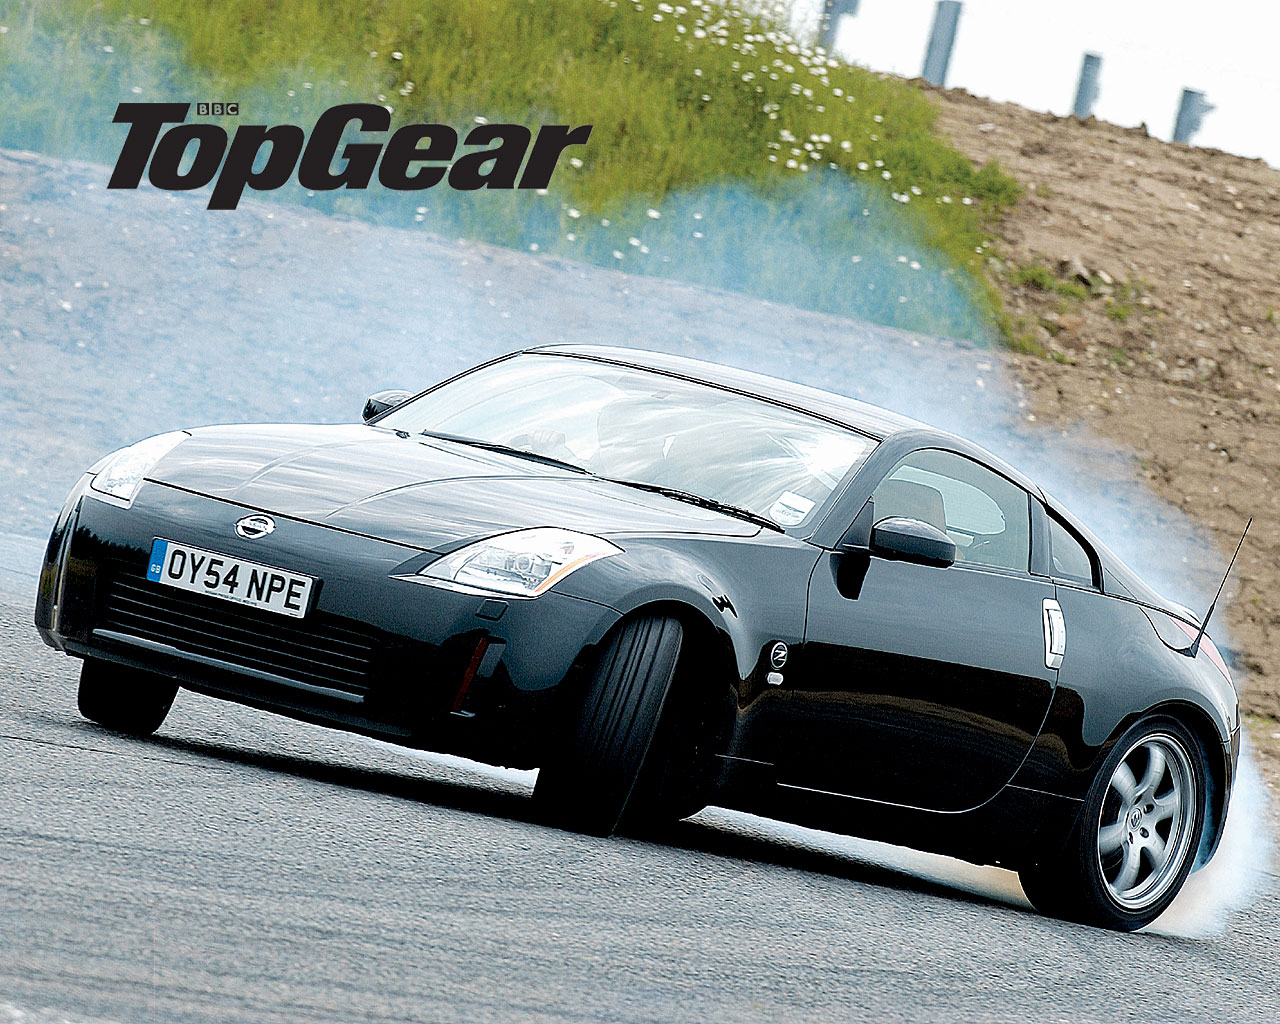 Top Gear's greatest cars of the last 30 years: Nissan 350Z and